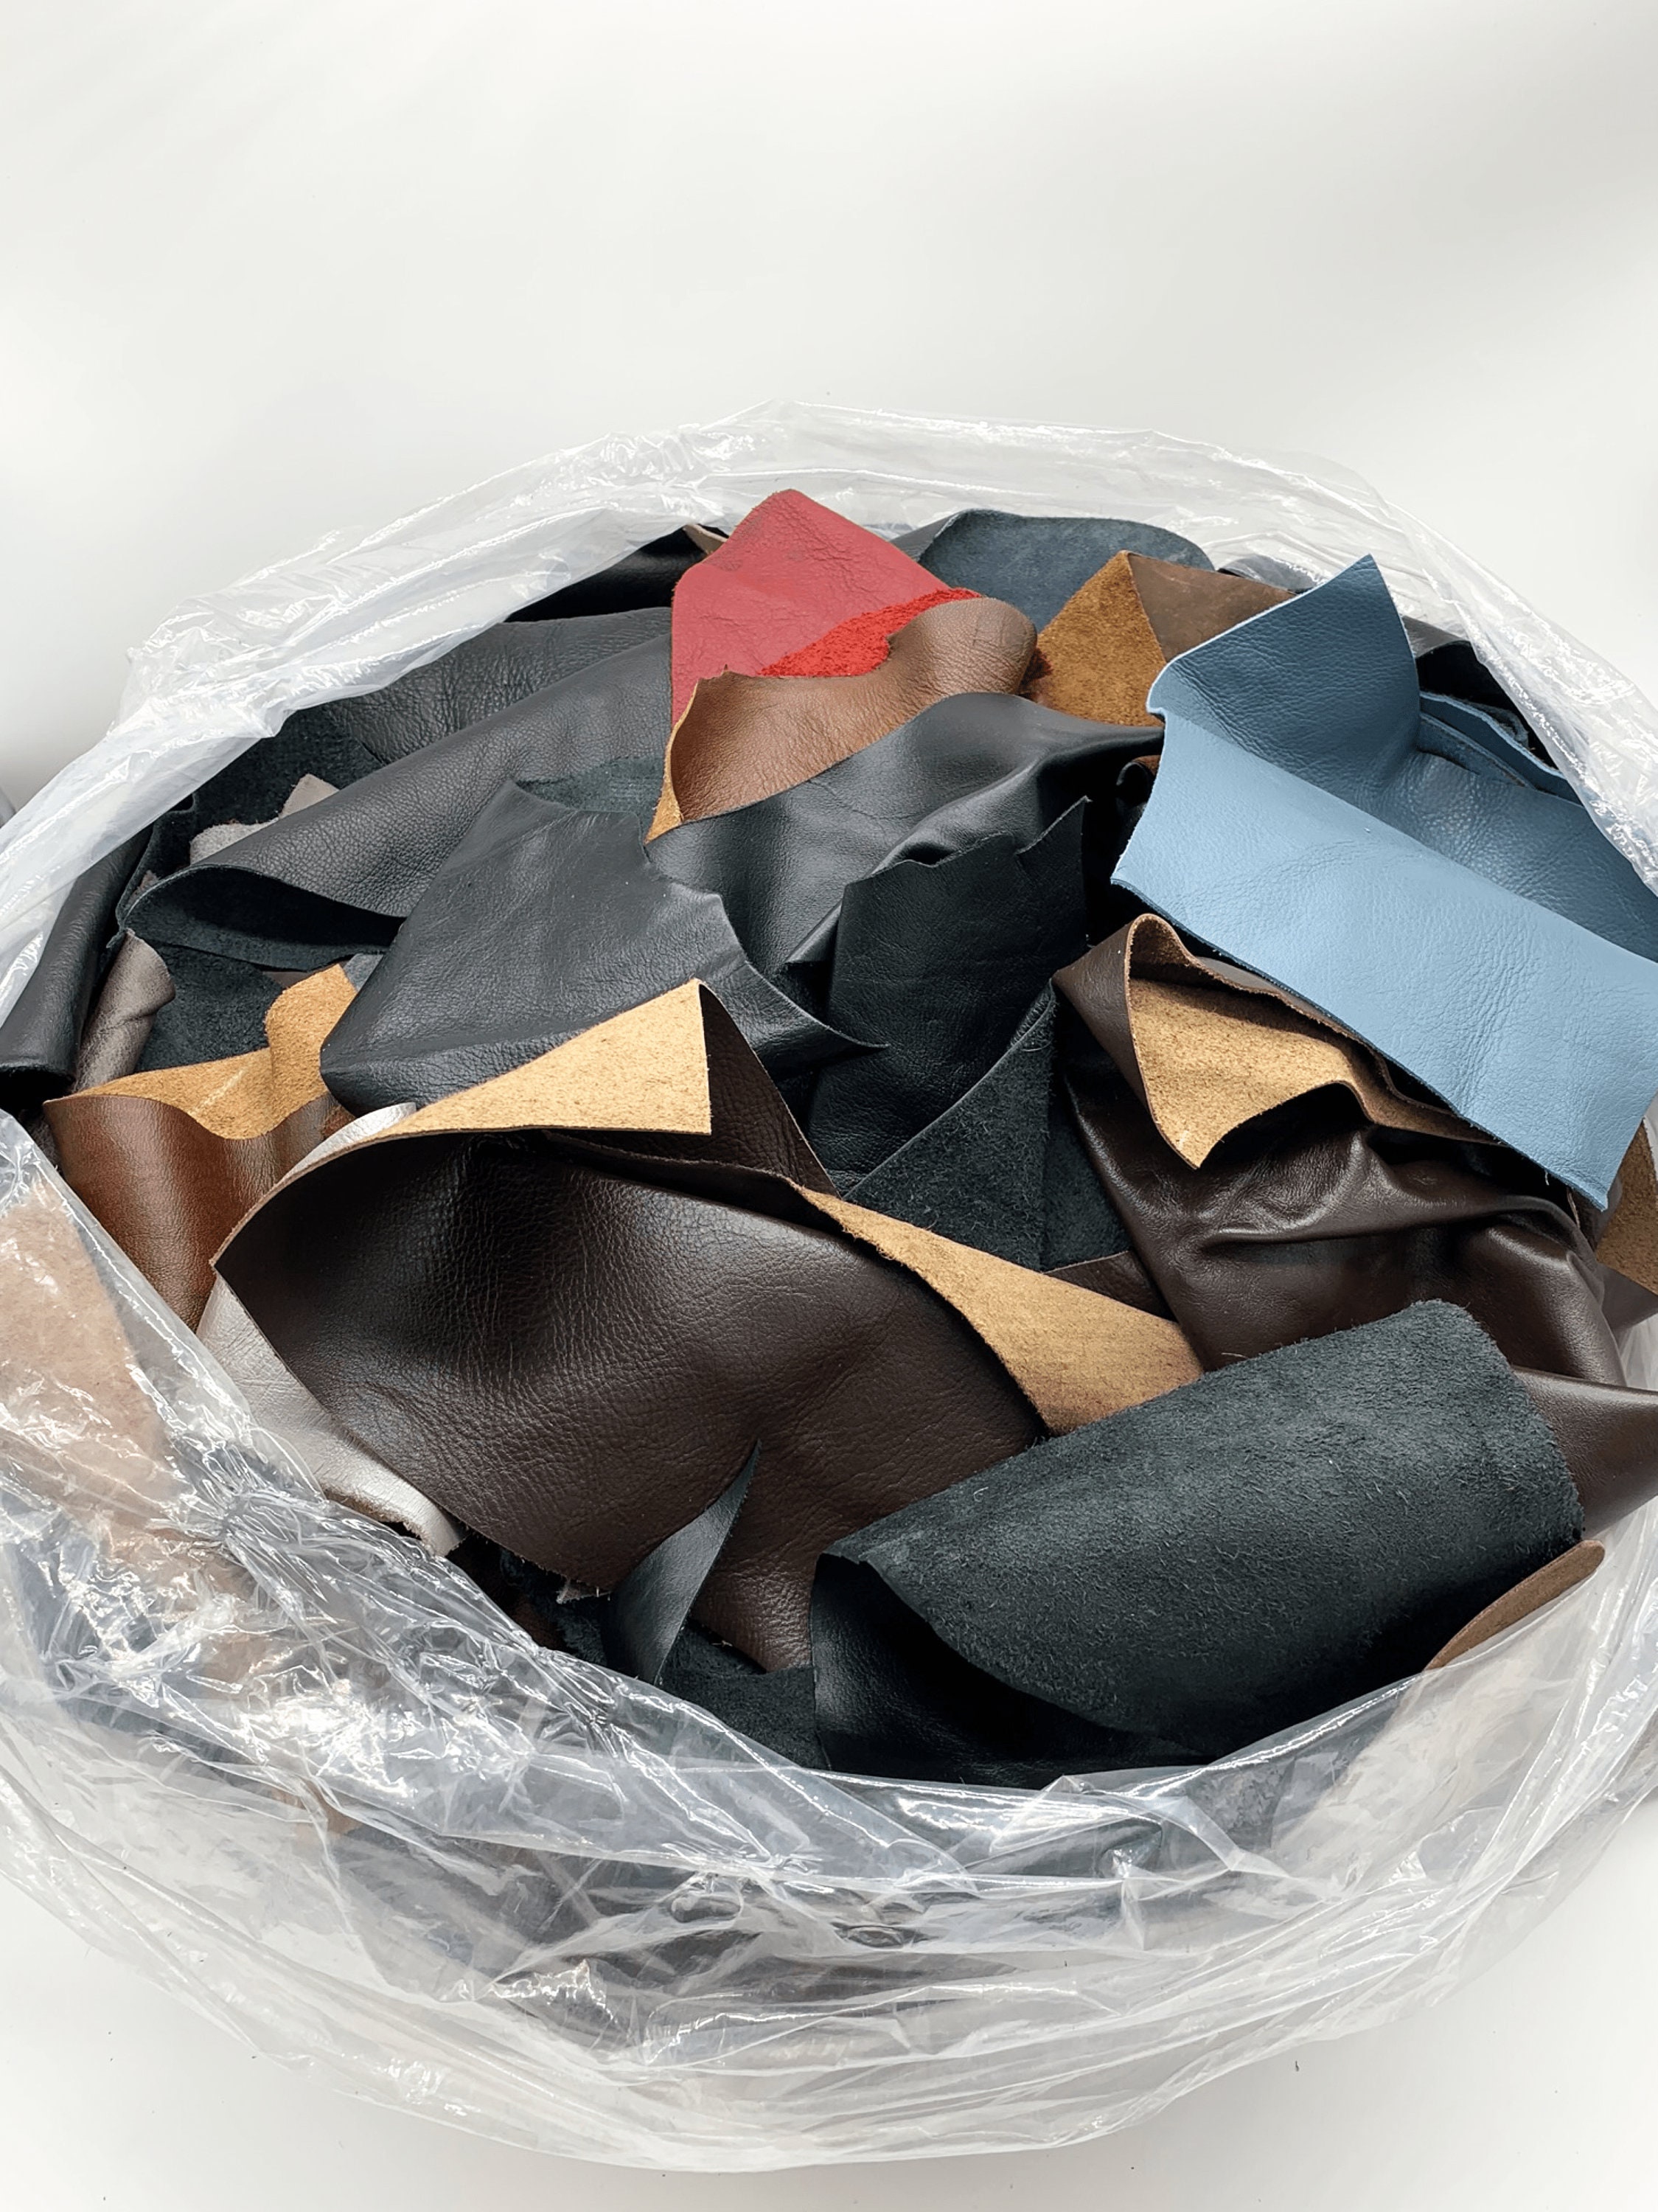 Small Random Leather Scraps and Off Cuts | Gillows & Co.